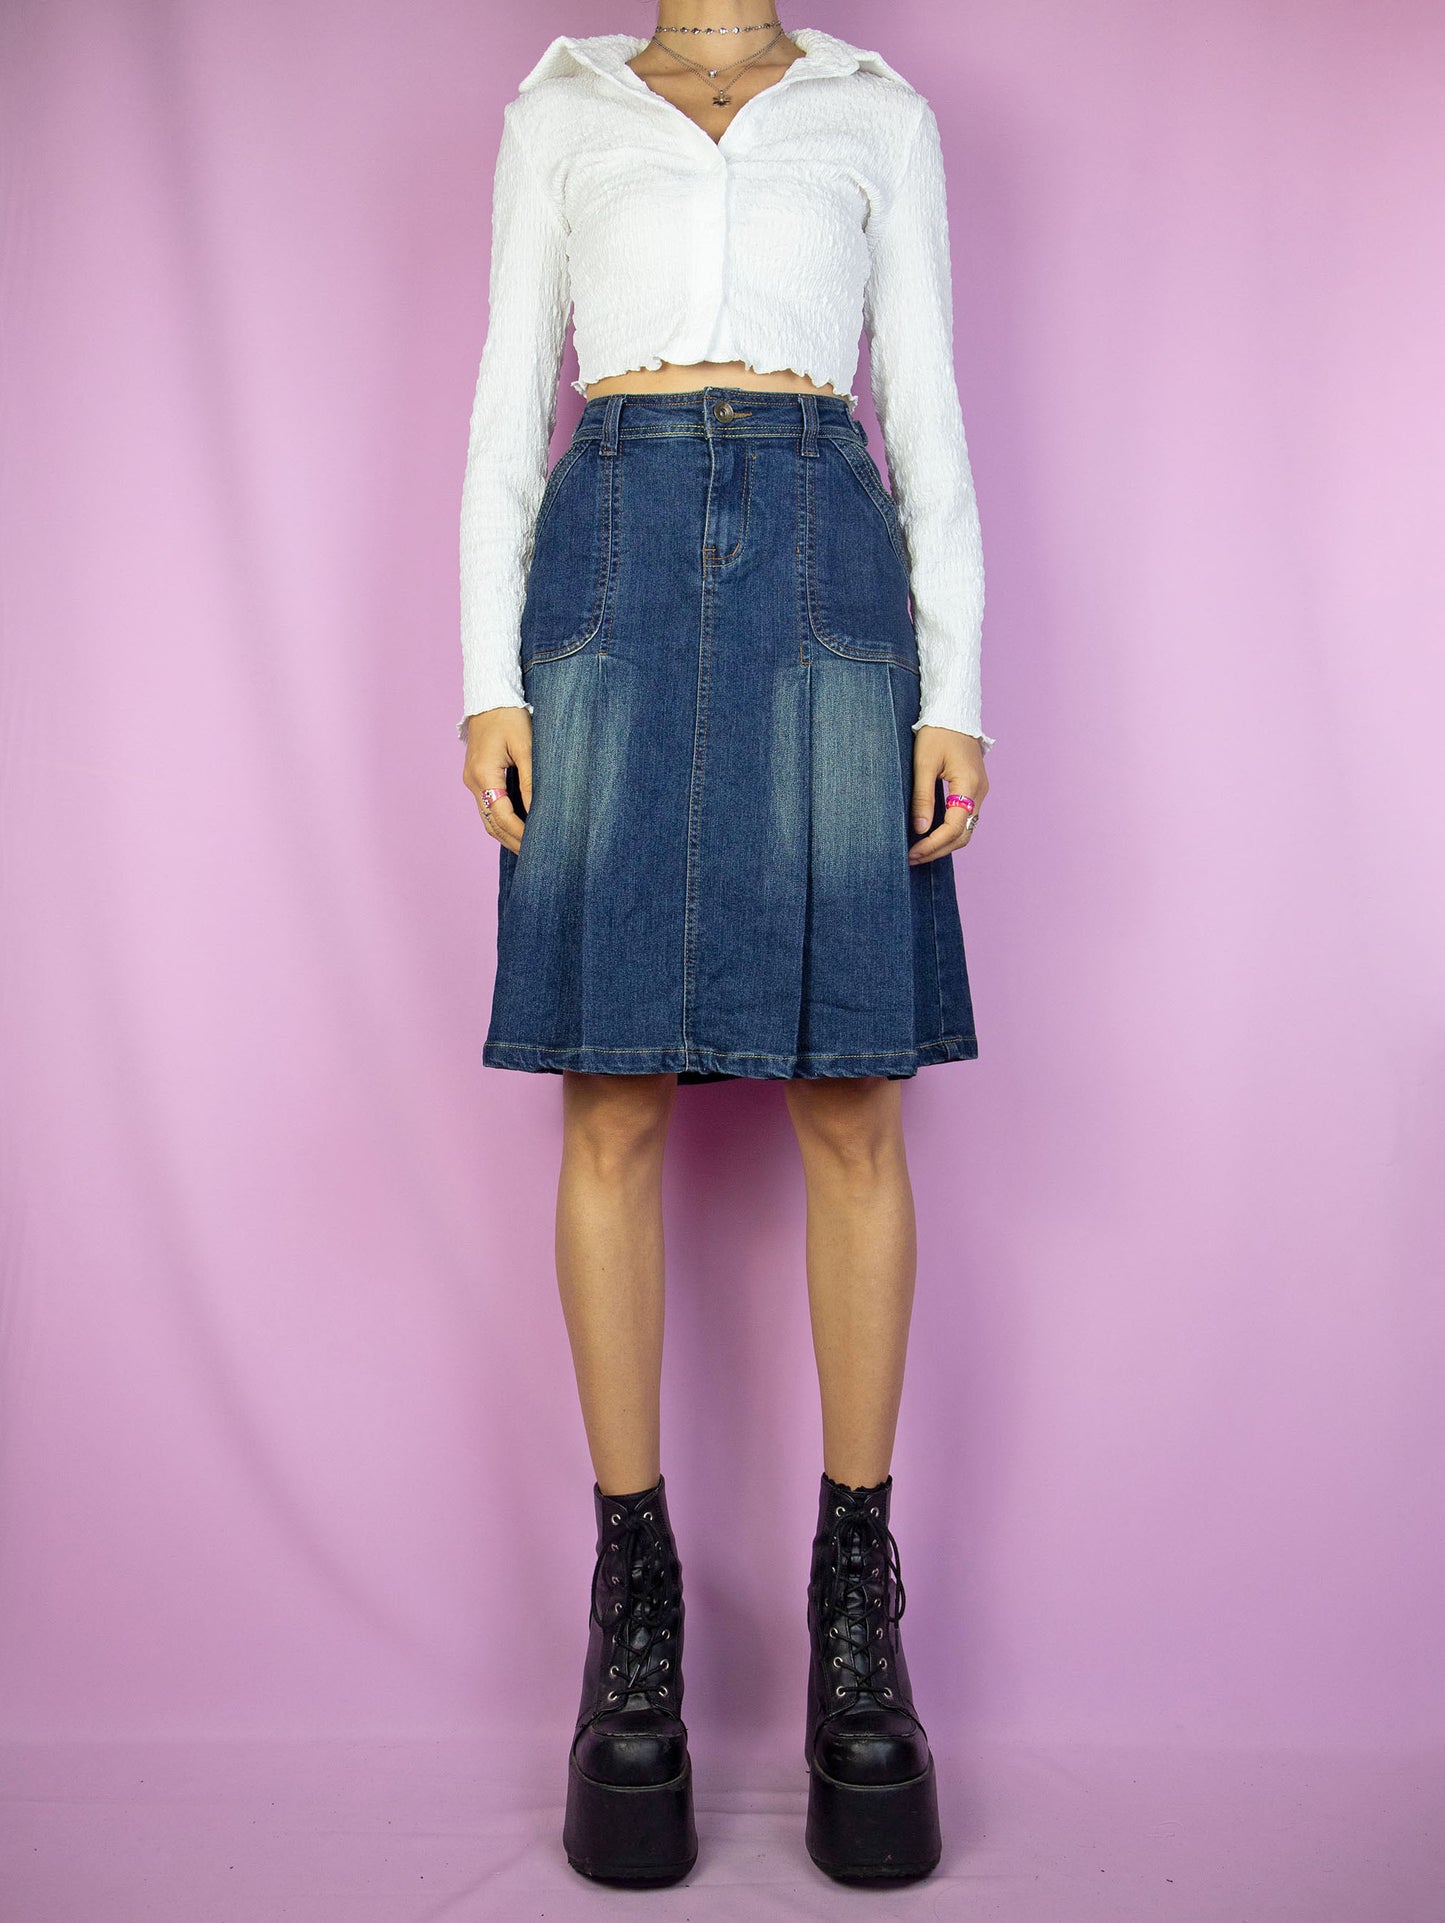 The Y2K Denim Pleated Skirt is a vintage acid wash pleated denim skirt with pockets and embroidered floral detail on the back. Cyber grunge 2000s jean mini skirt.